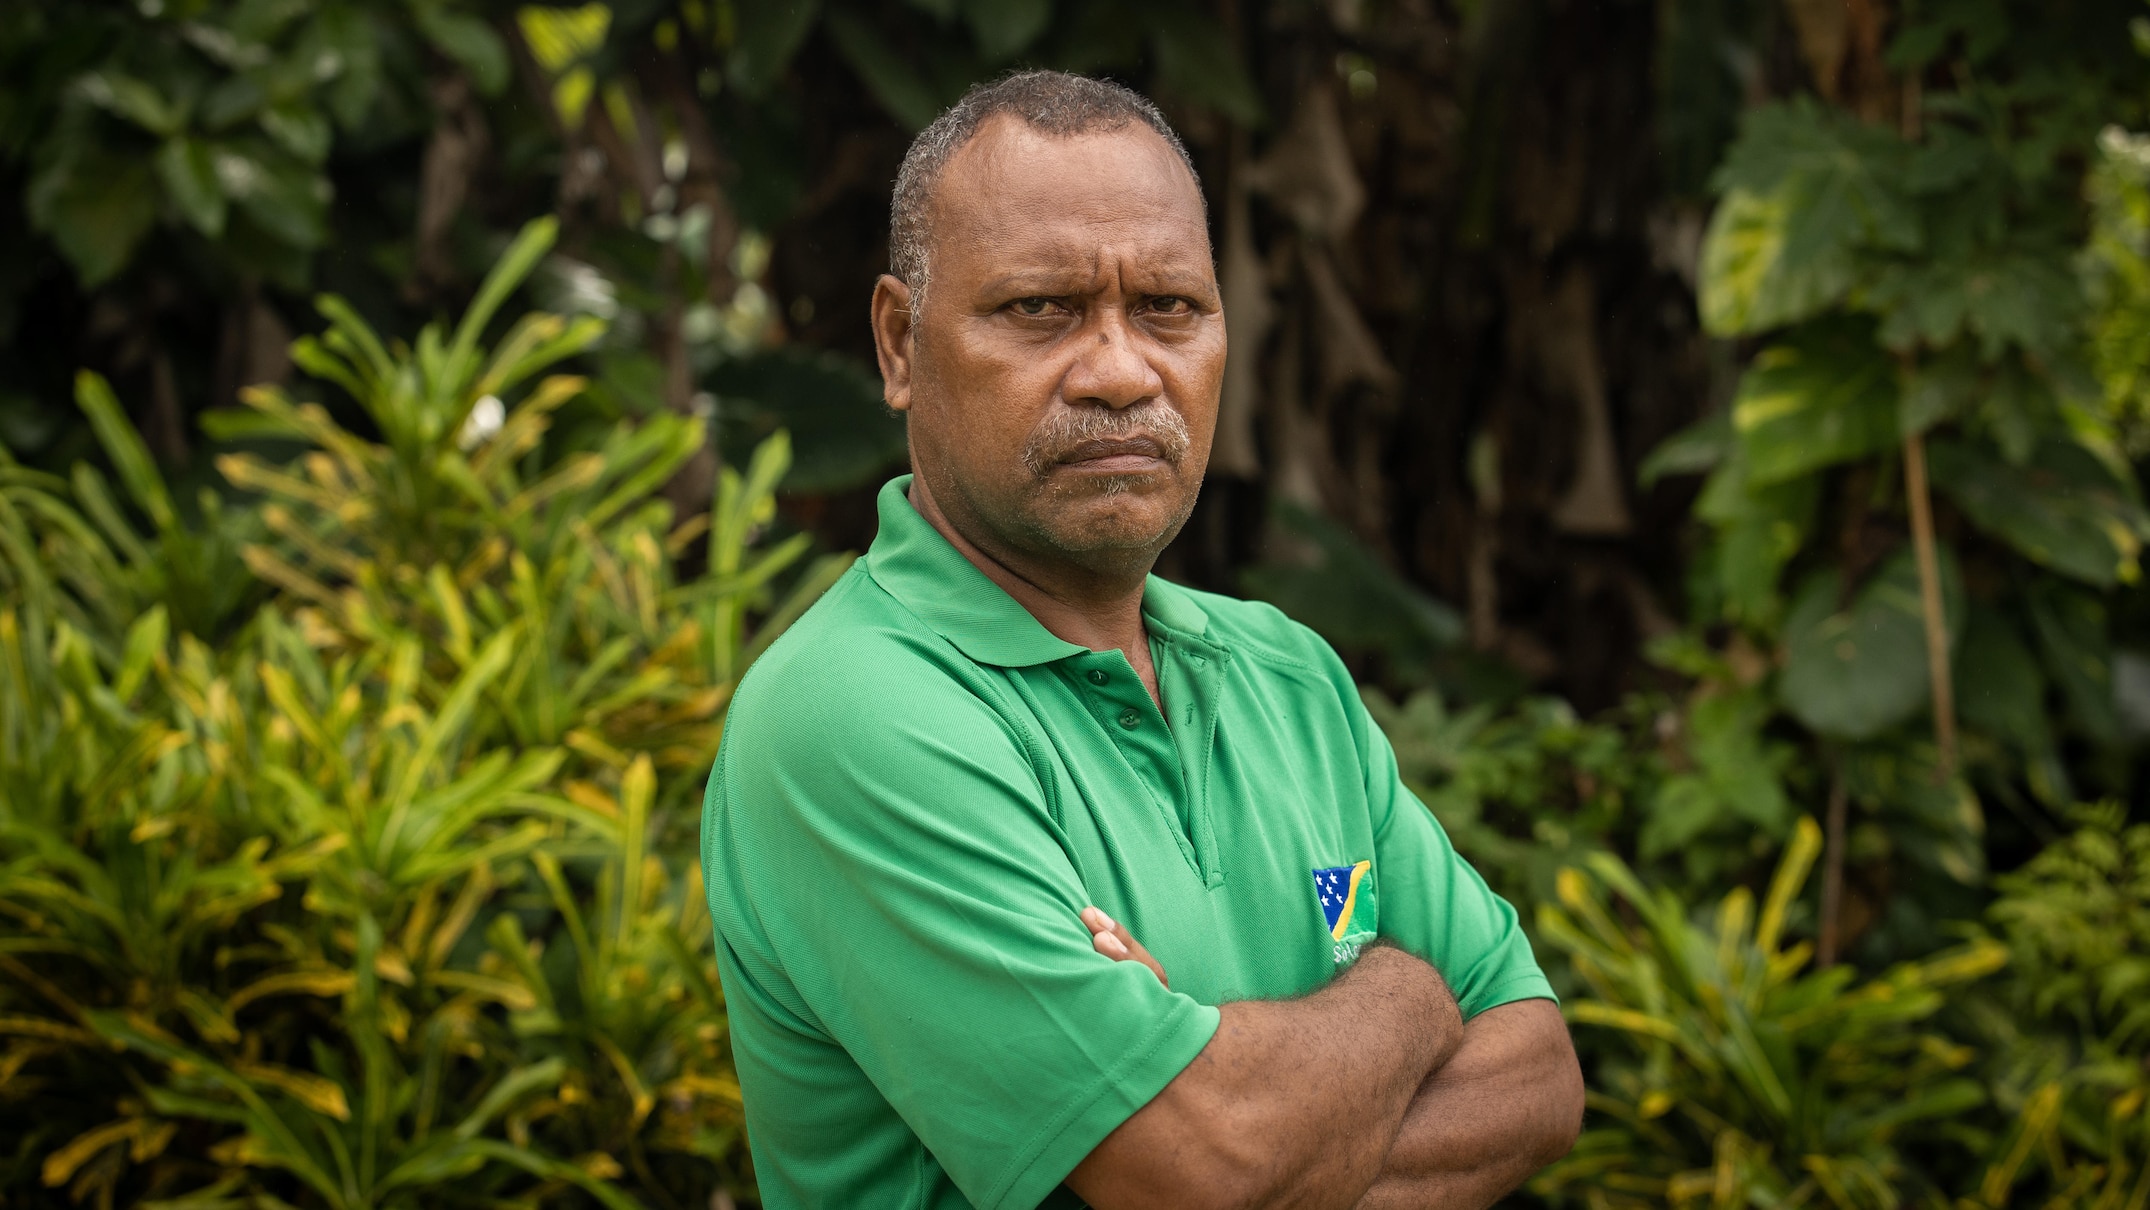 solomon islands election sees prominent china critic regain seat as counting continues